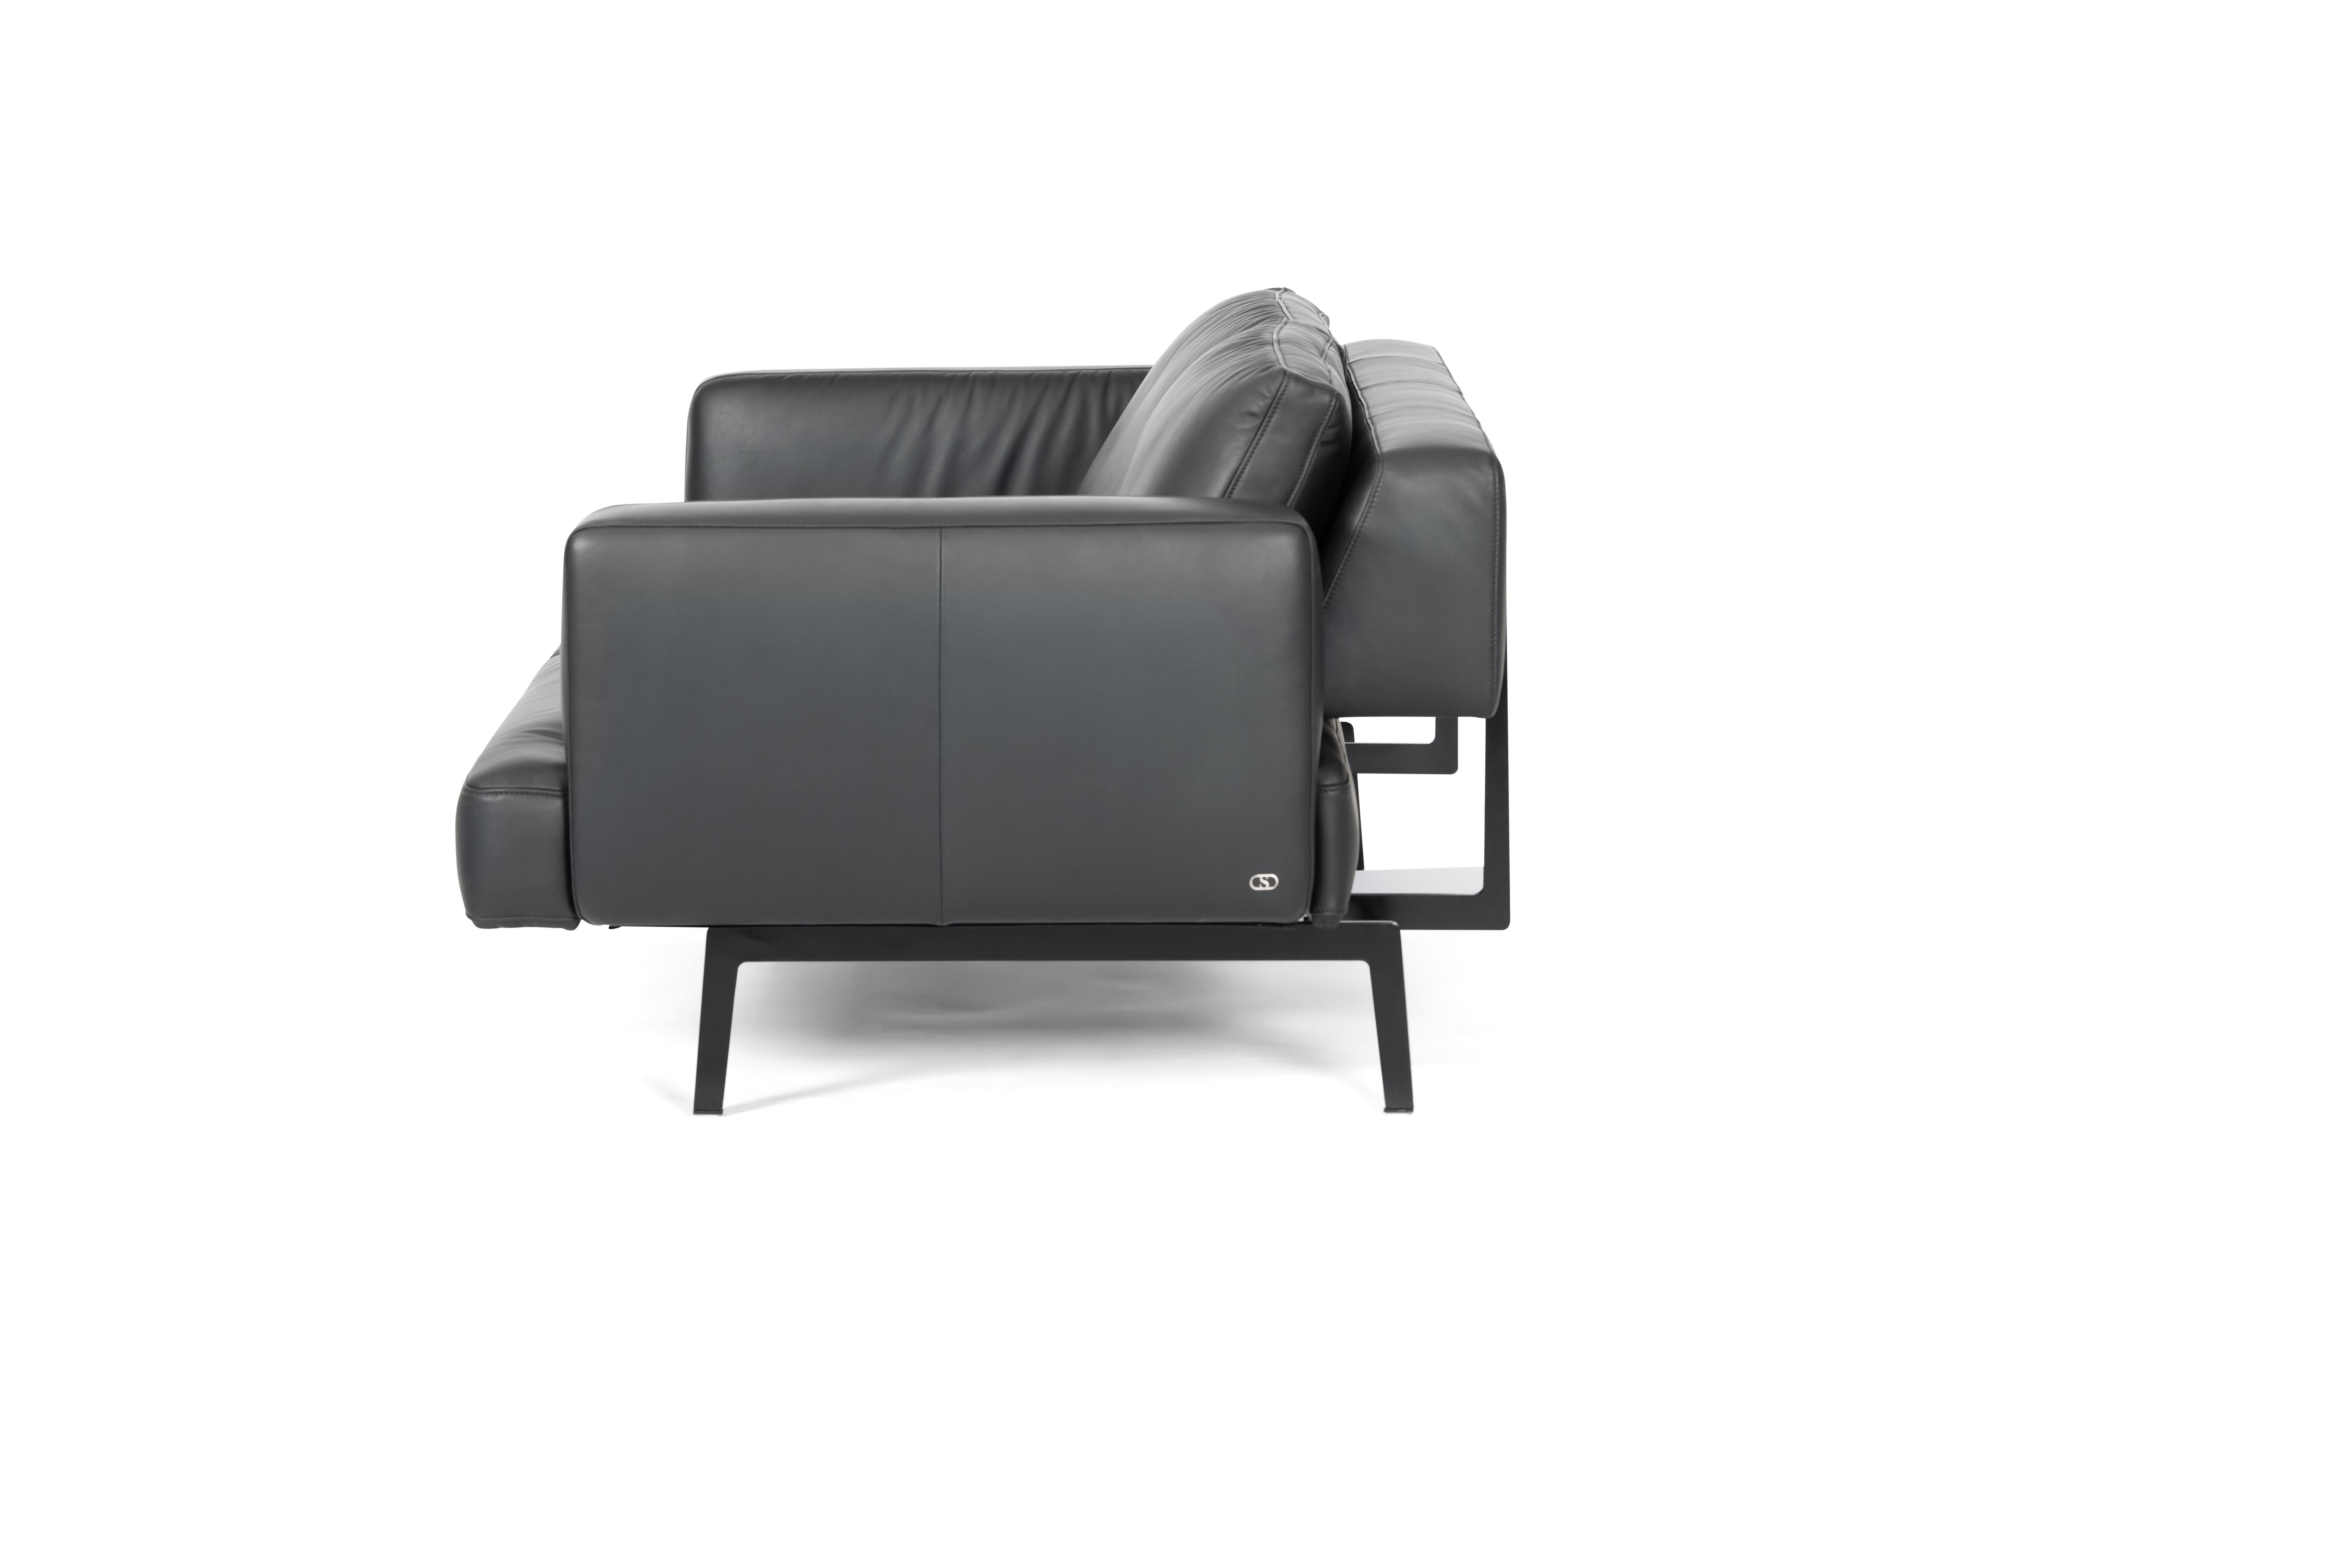 DeSede Ds-747/04 Multifunctional Sofa in Black Leather Seat and Back Upholstery For Sale 1